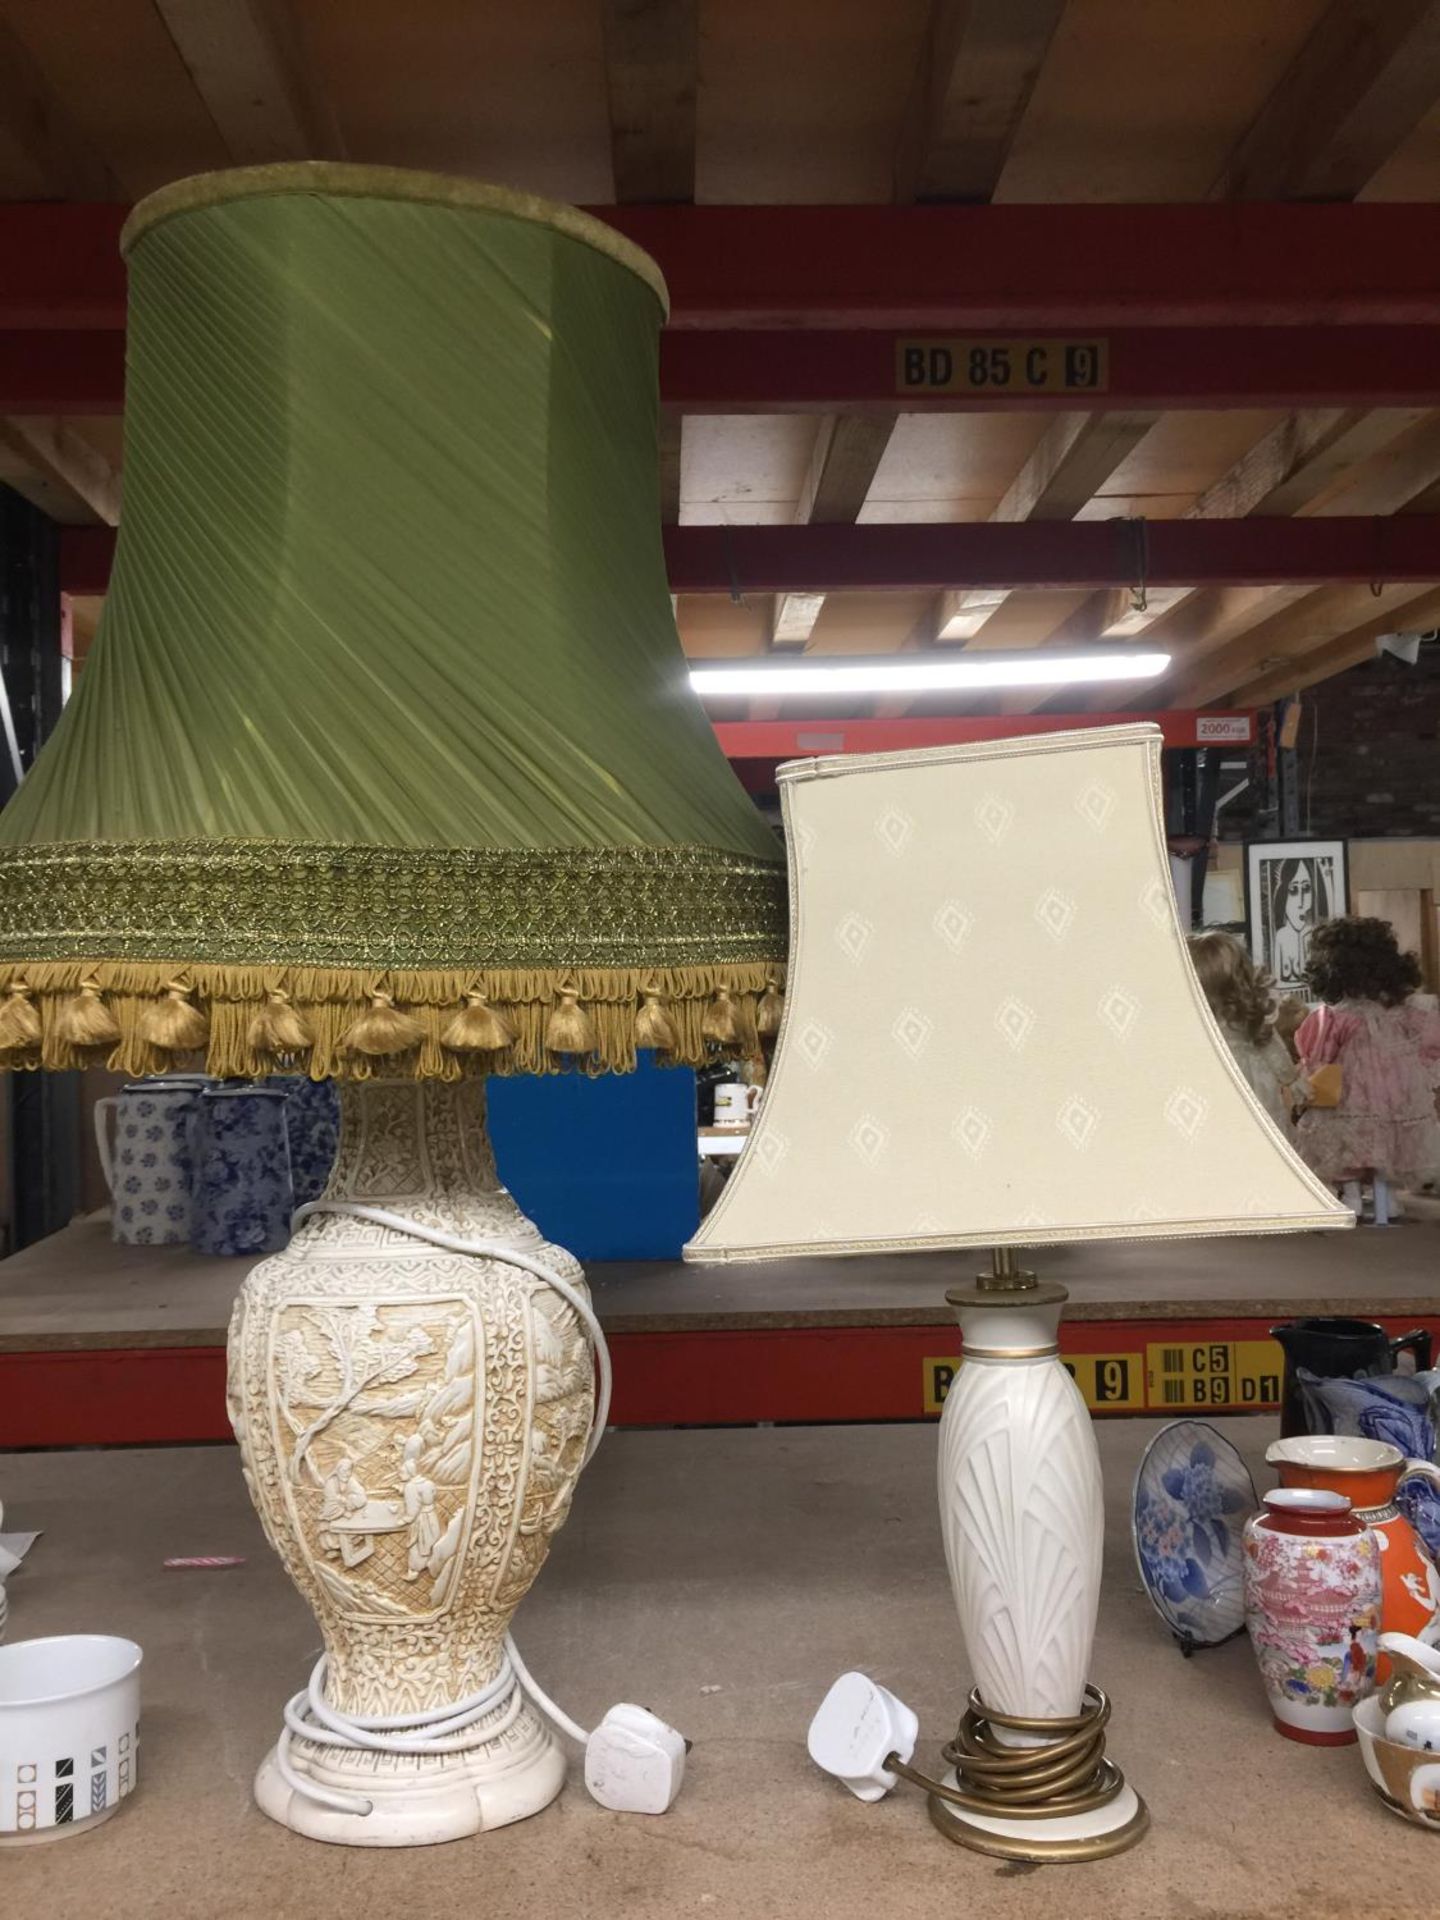 A LARGE VINTAGE WHITE RESIN TABLE LAMP WITH EMBOSSED DETAIL AND A SAGE GREEN SHADE WITH TASSLES